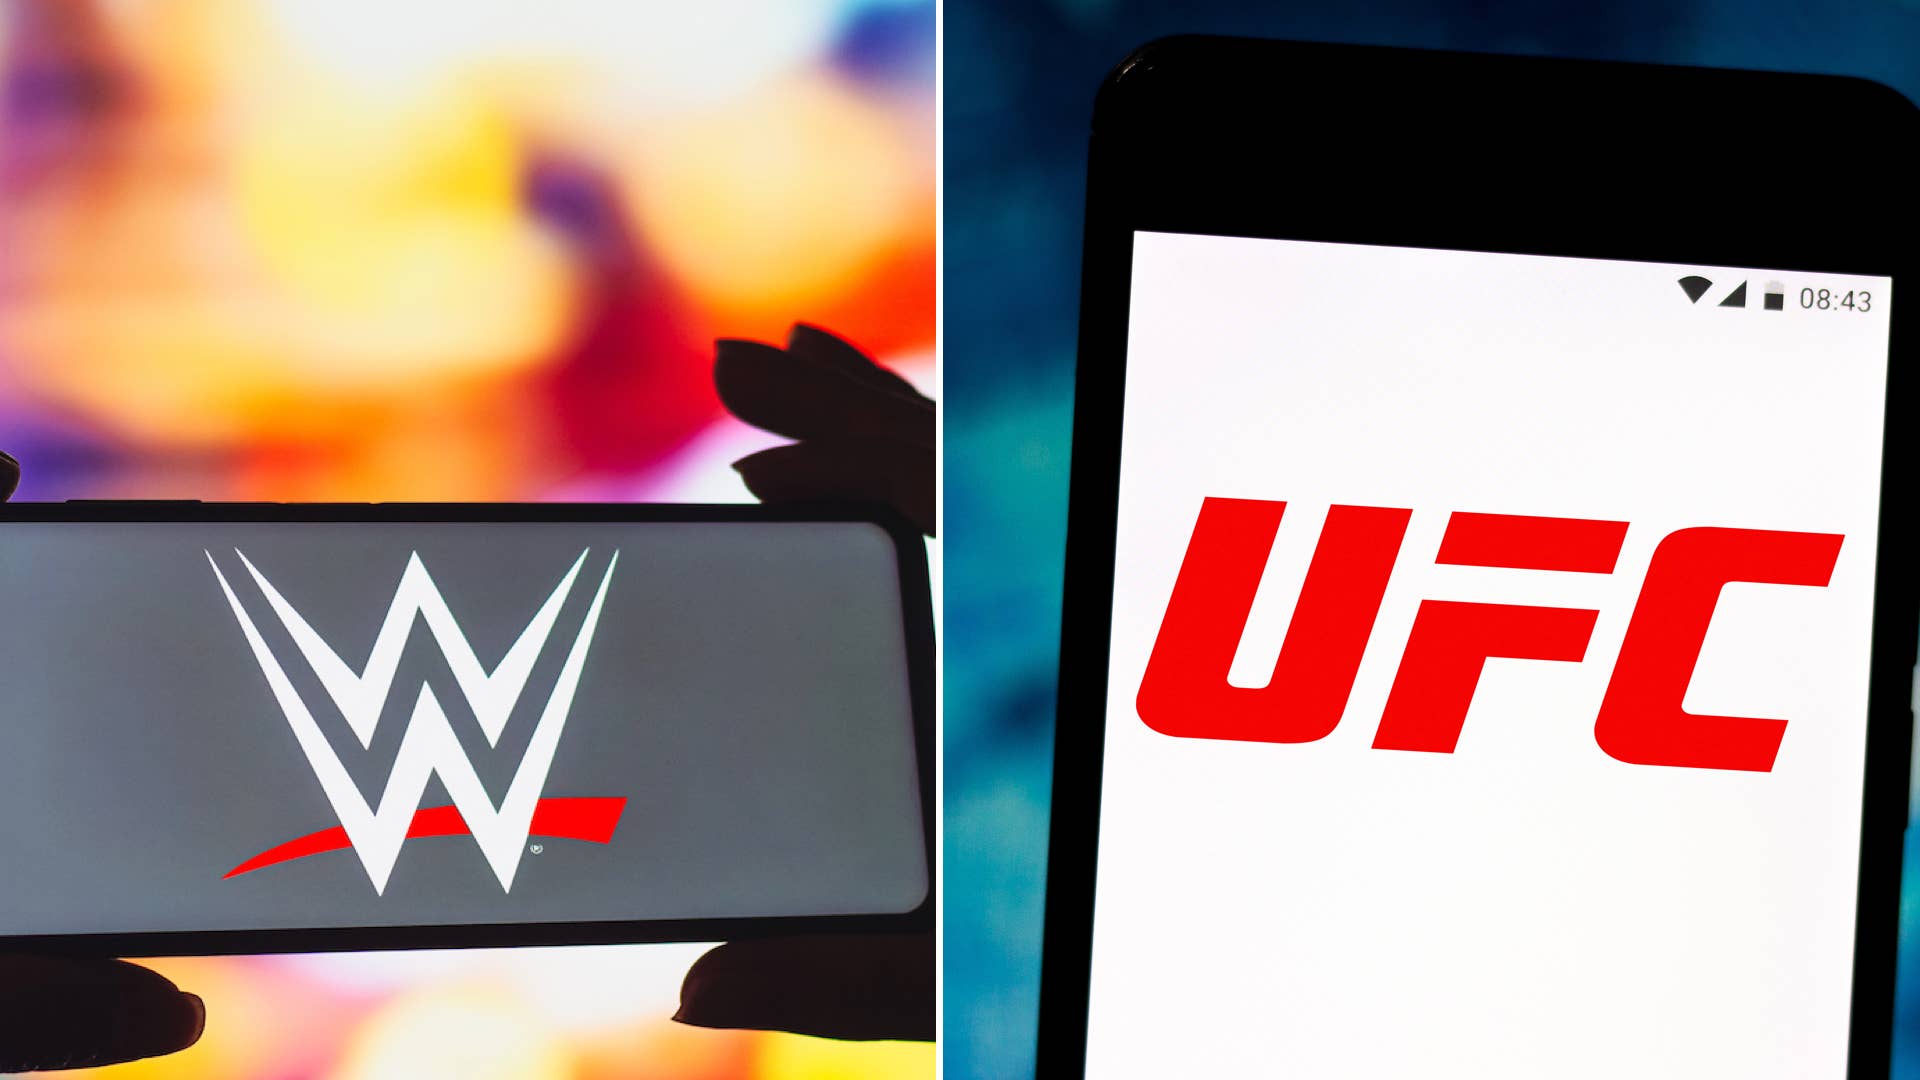 Image of WWE and UFC logo on smartphone screens.